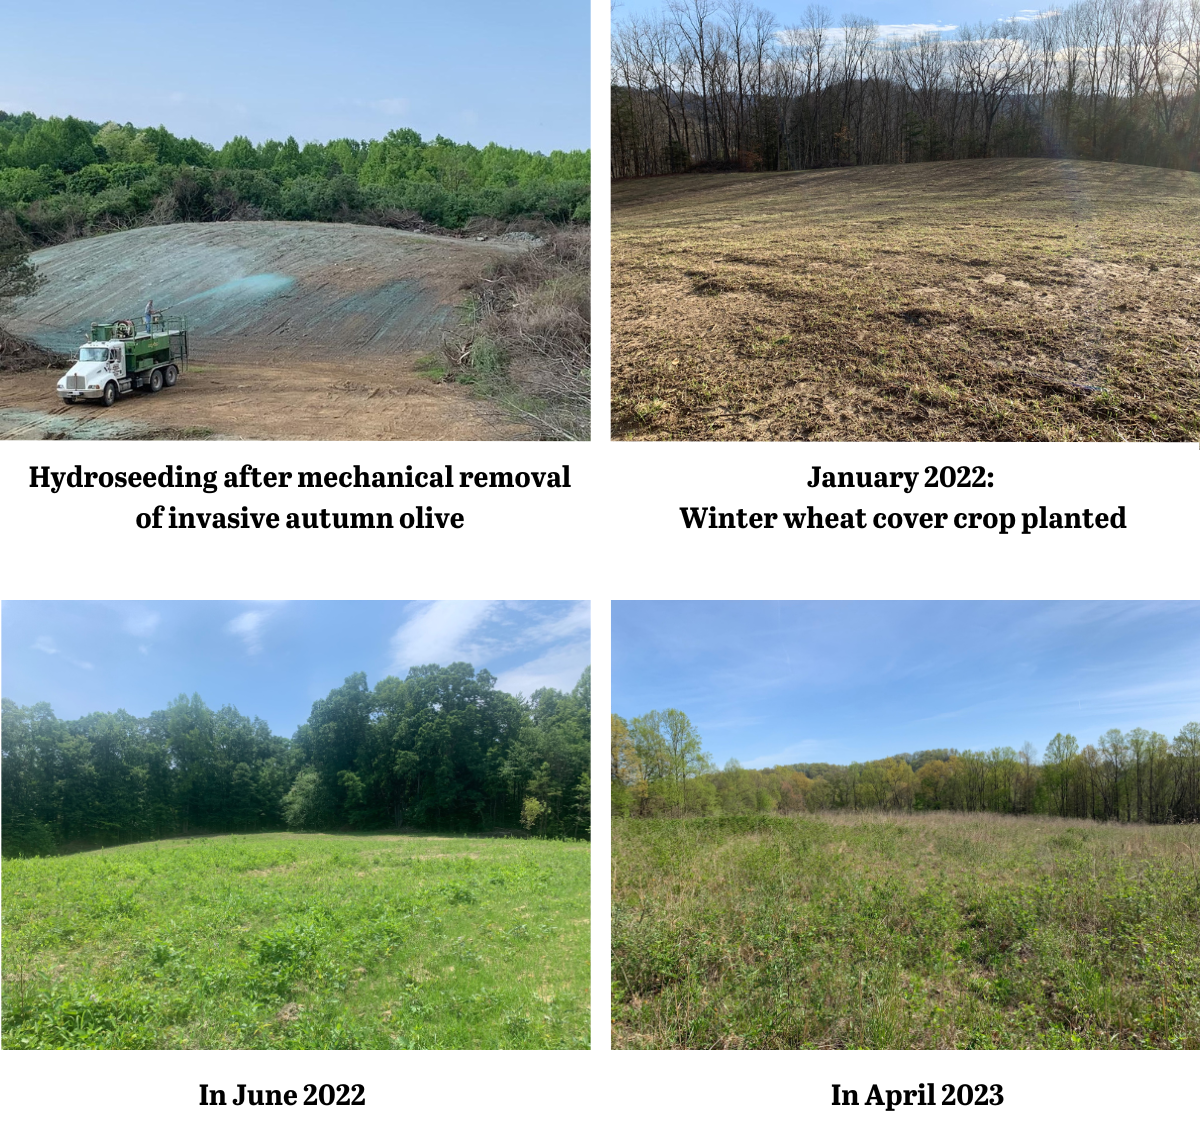 A series of images depicting the elk habitat work done at Breaks interstate park which were funded by the explore the wild sweepstakes. the first image is of hydroseeding after invasive plant removal, the second is of a wheat cover crop that was planted in January 2022, the third is the field as a bright green meadow in June 2022 and the final image is in April 2023 as a mature meadow habitat